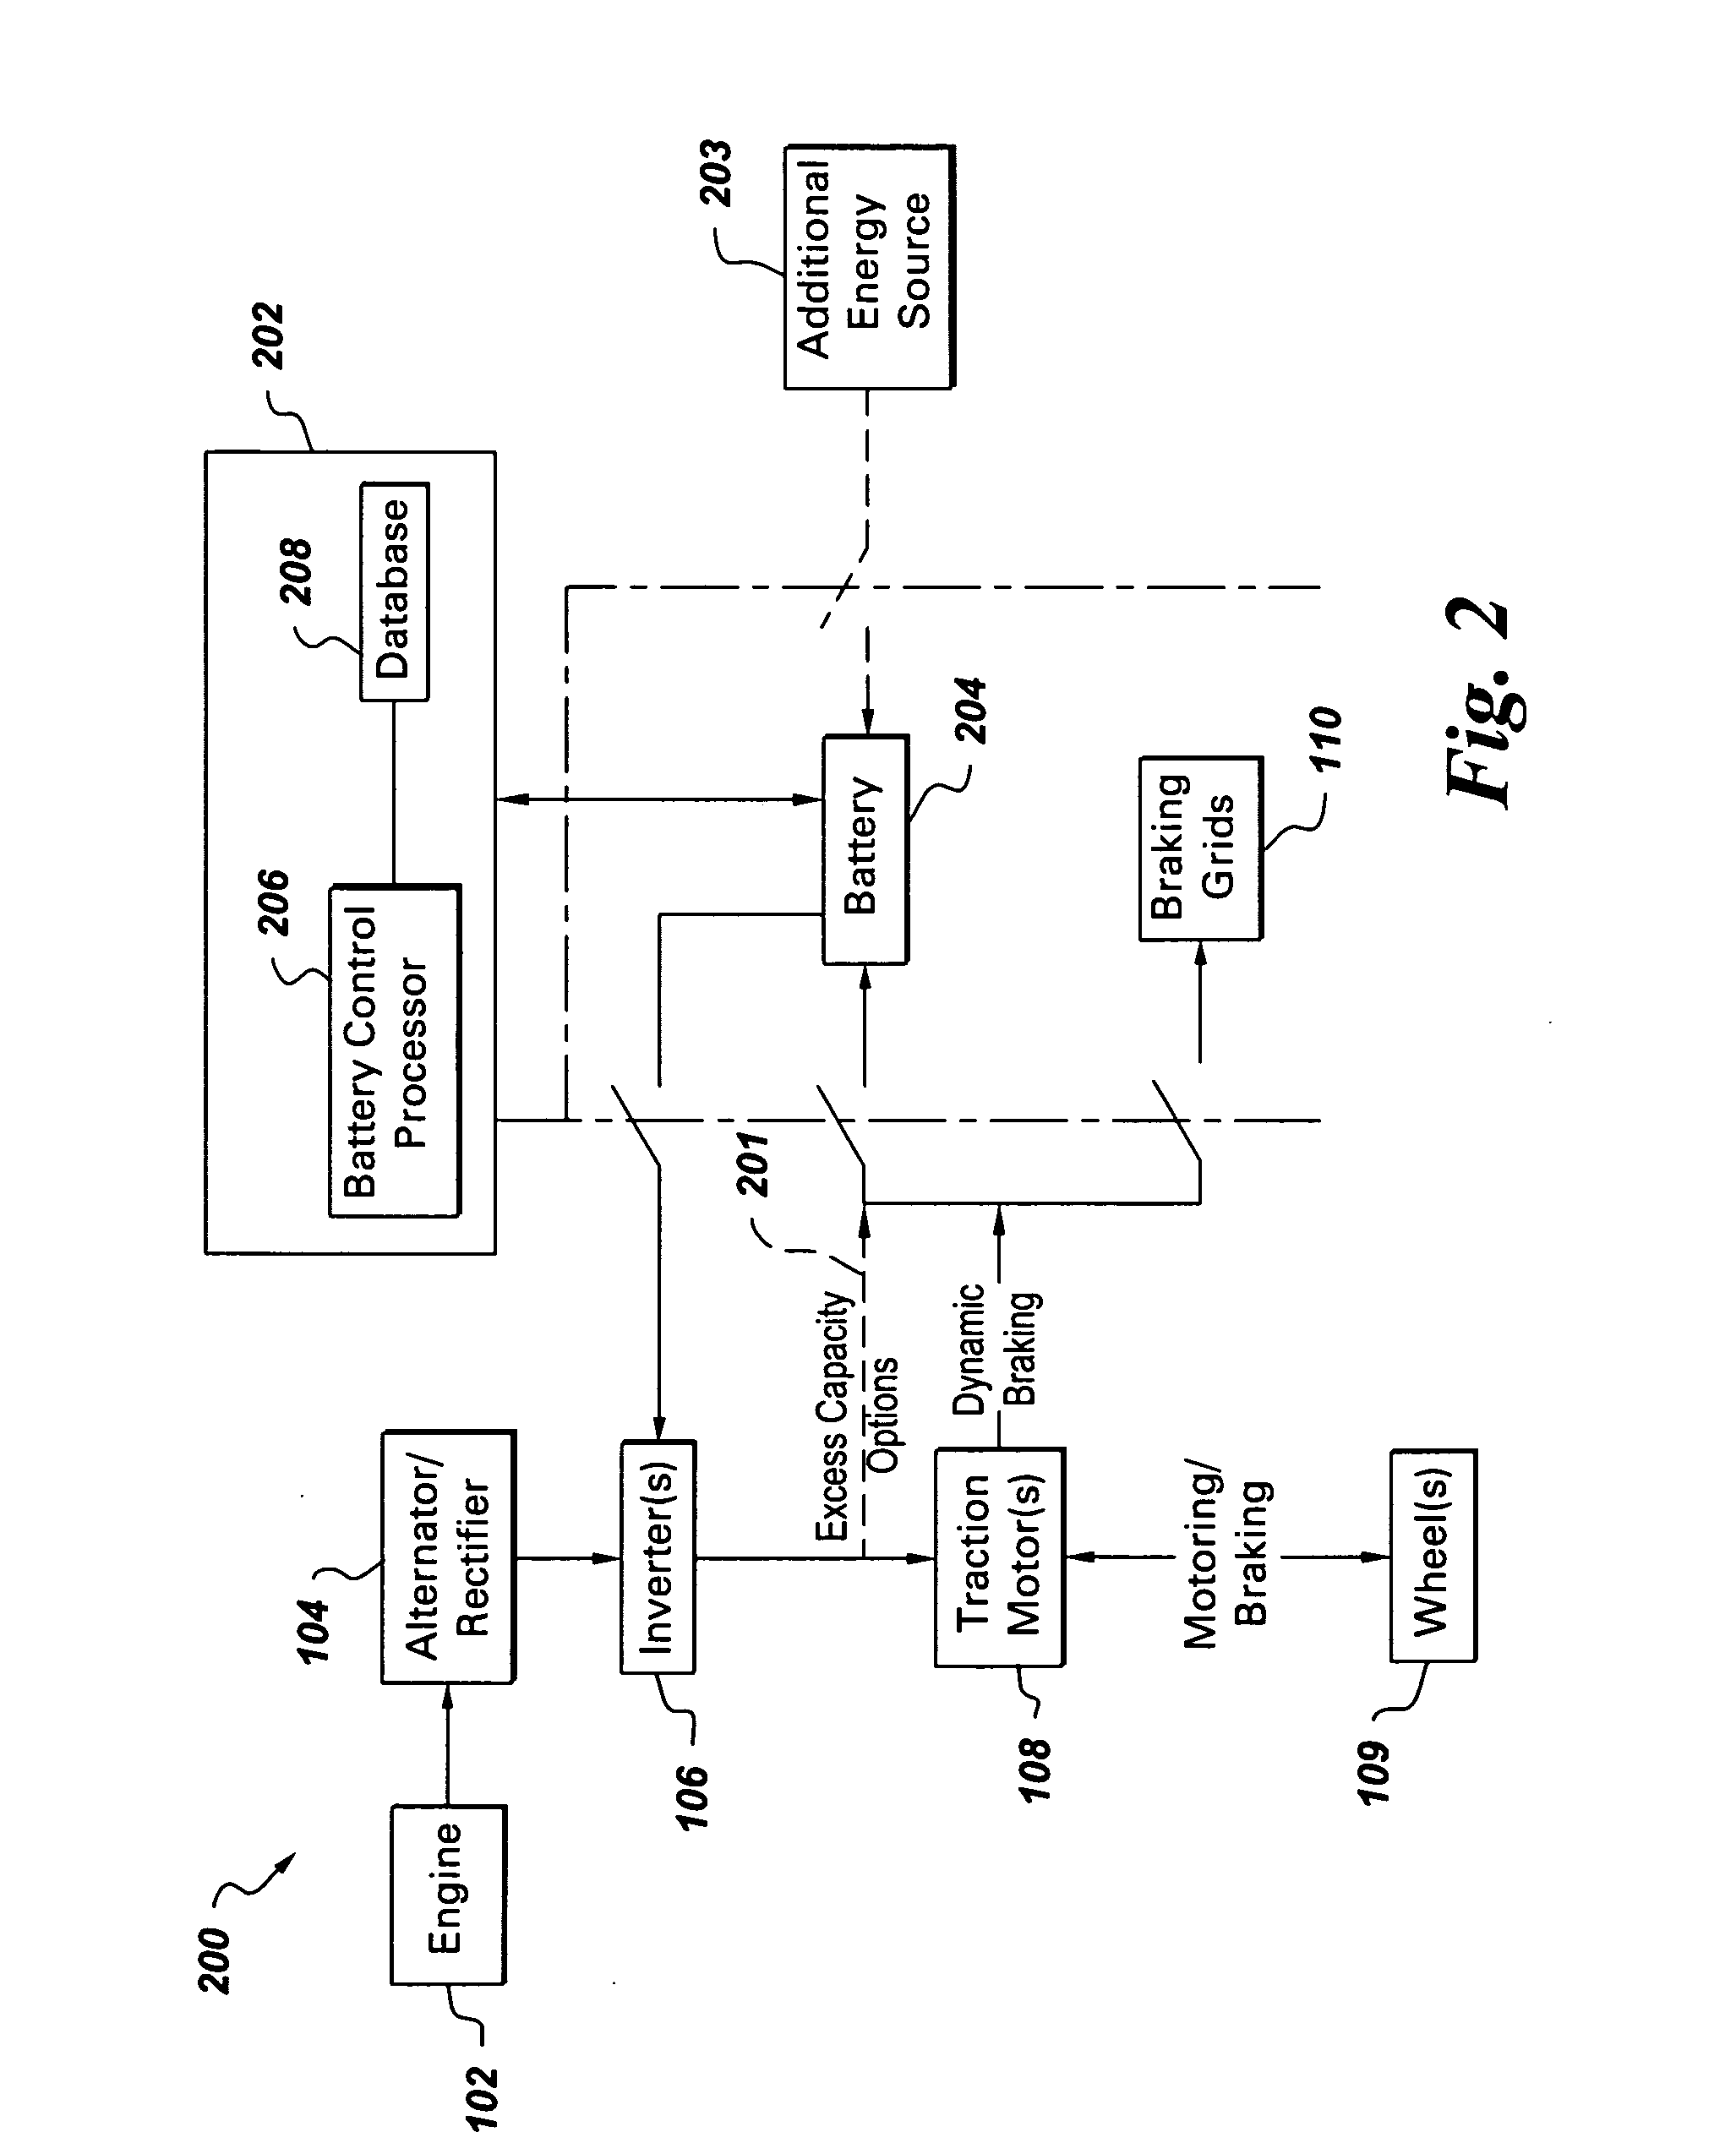 High temperature battery system for hybrid locomotive and offhighway vehicles